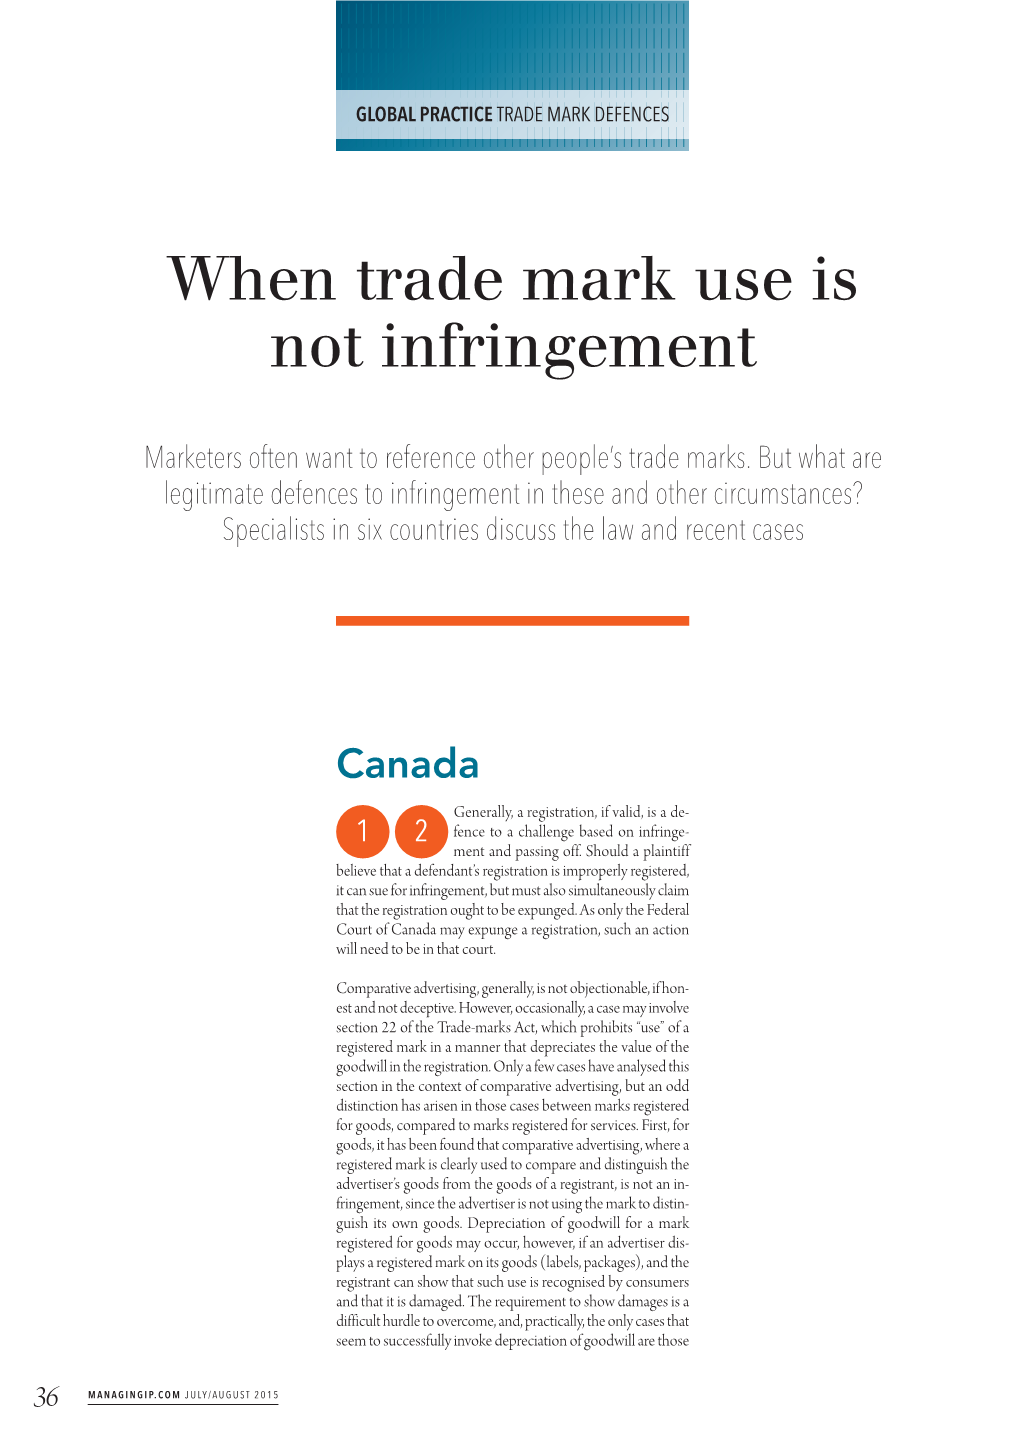 When Trade Mark Use Is Not Infringement